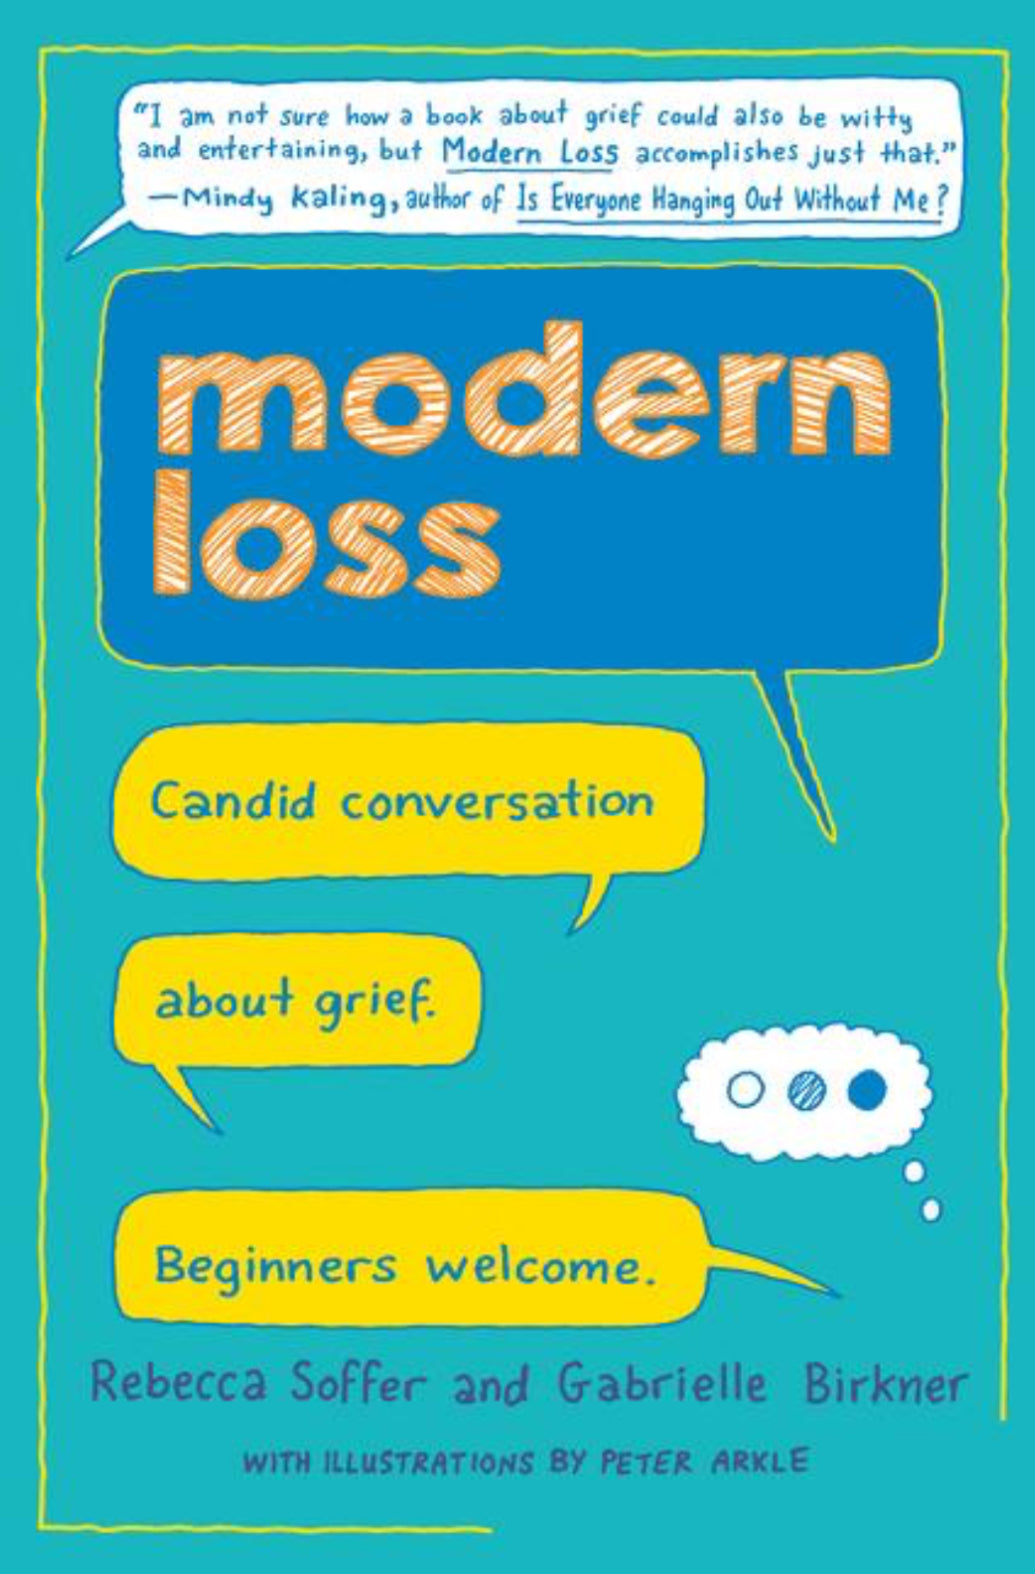 Modern Loss: Candid Conversation About Grief. Beginners Welcome. by Rebecca Soffer - 5 Star Review!